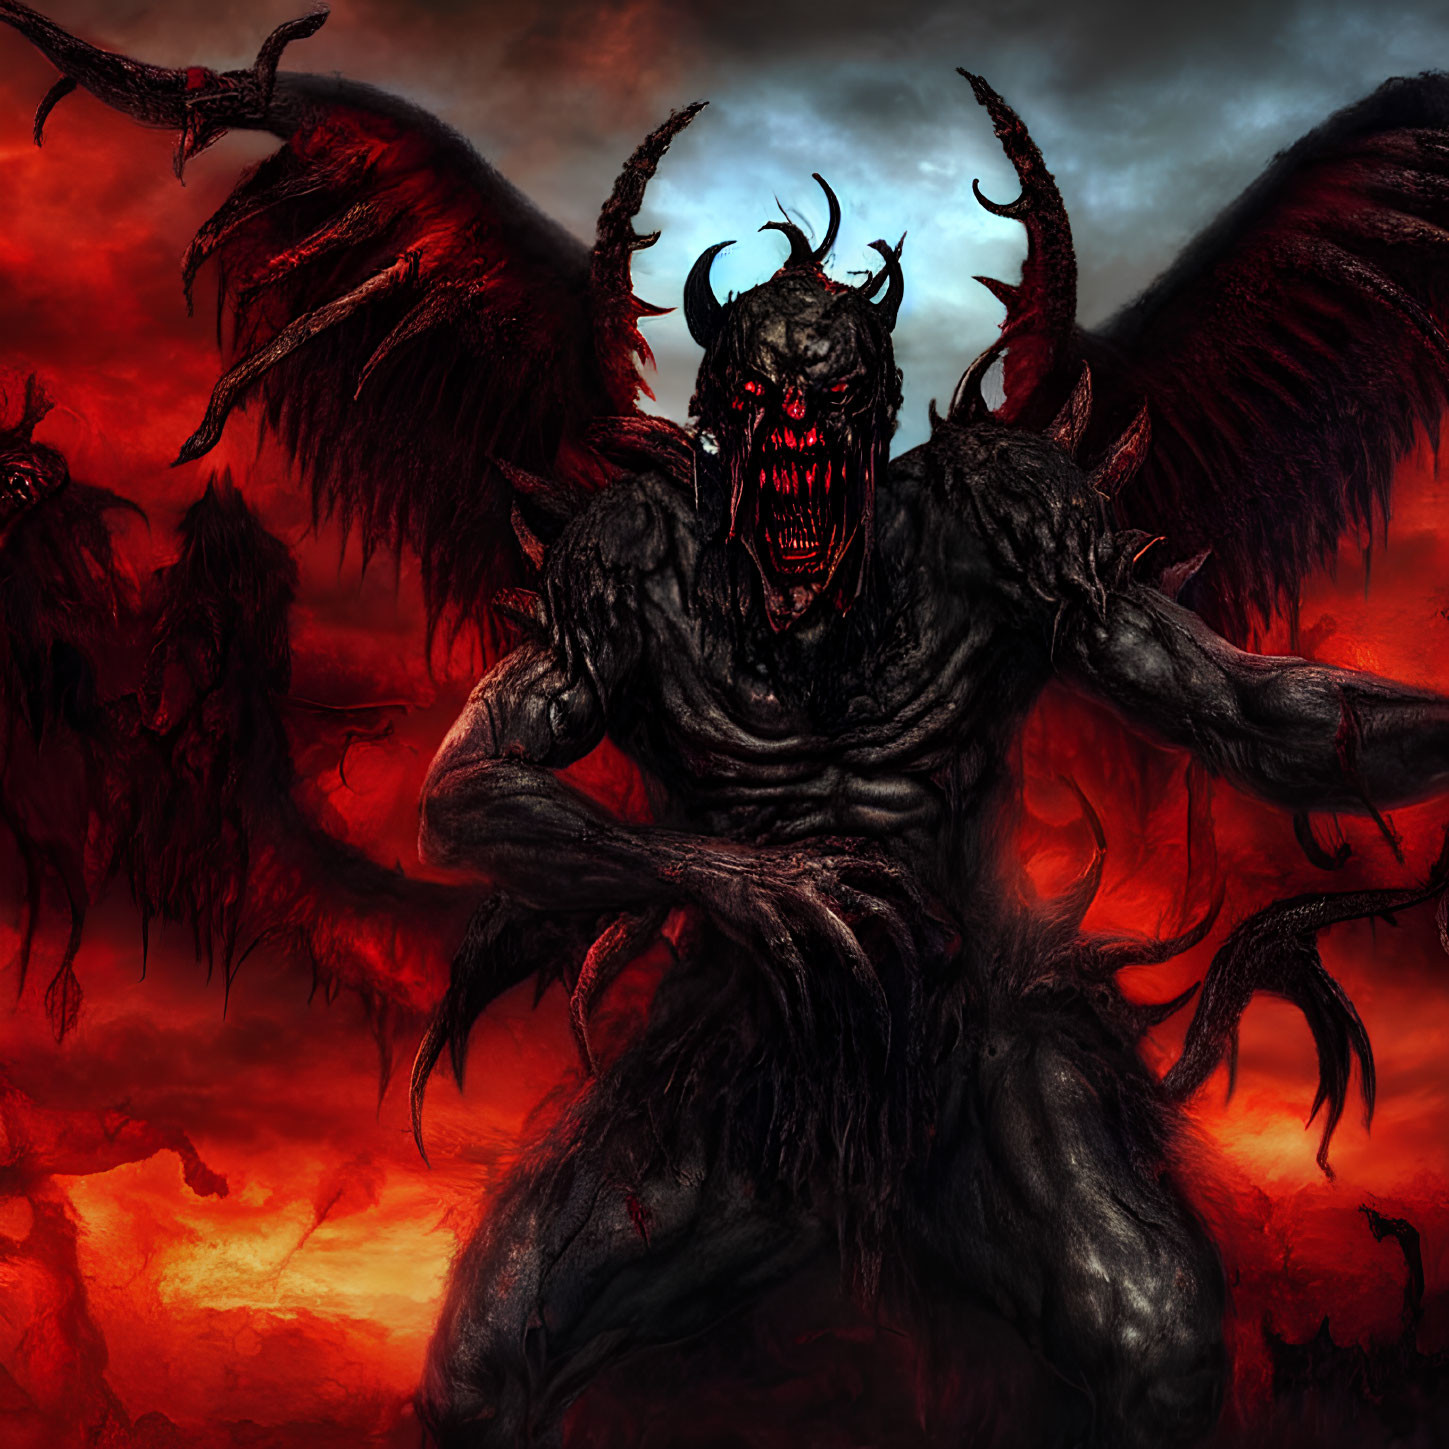 Sinister demon with large wings and red eyes in a hellish backdrop